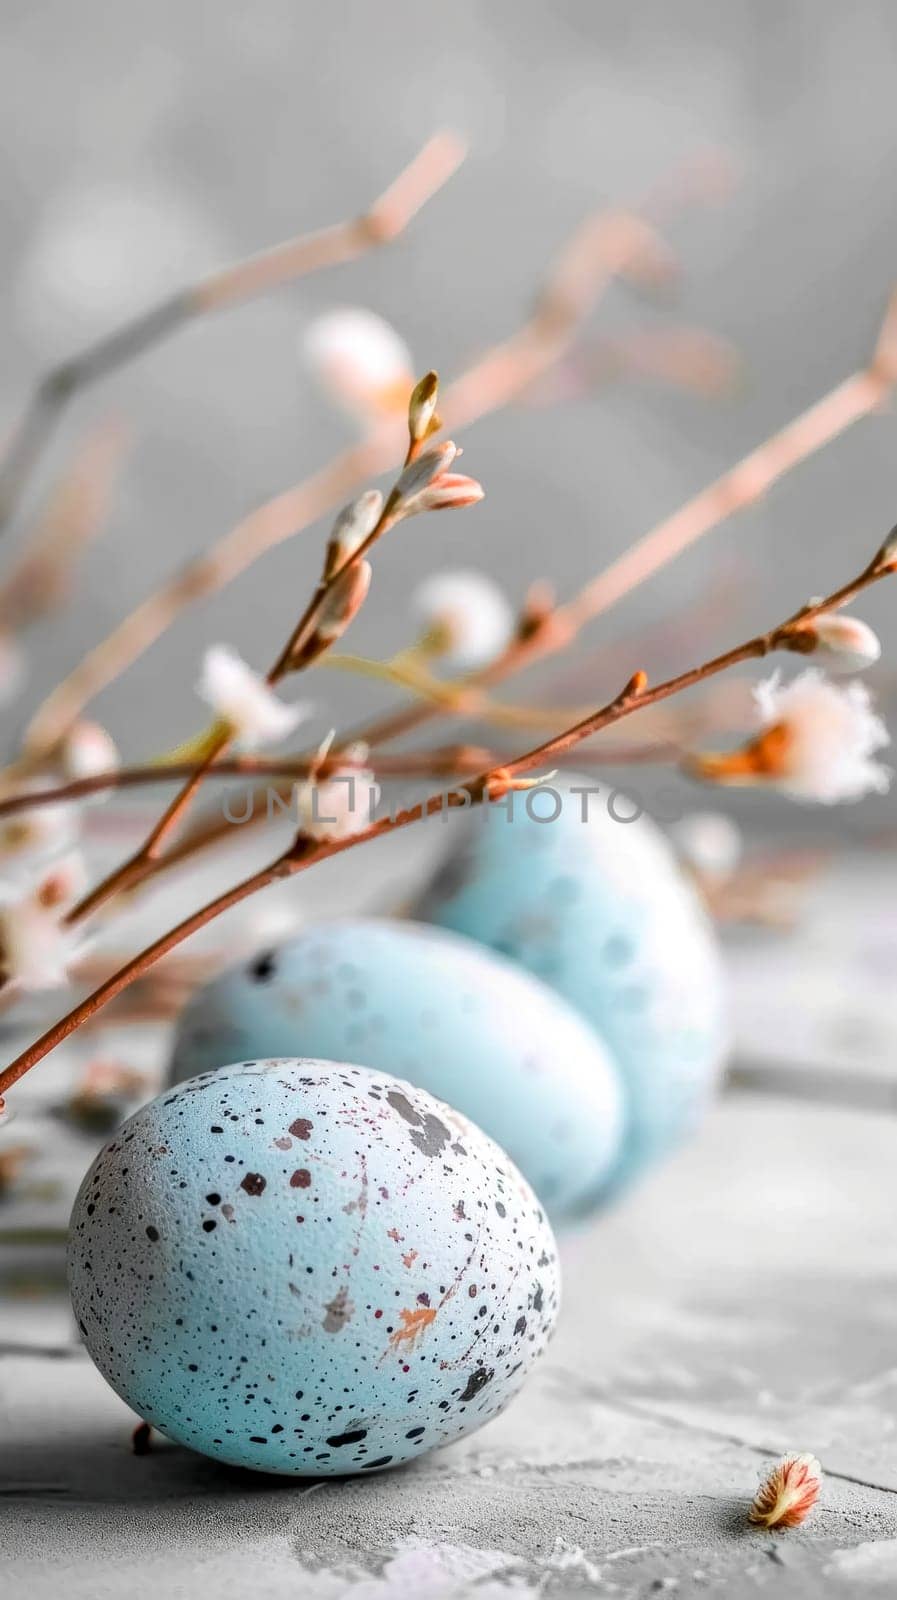 elegant Easter setting with speckled eggs in shades of blue, nestled among delicate spring blossoms, all set against a soft, neutral background, creating a serene and festive atmosphere by Edophoto